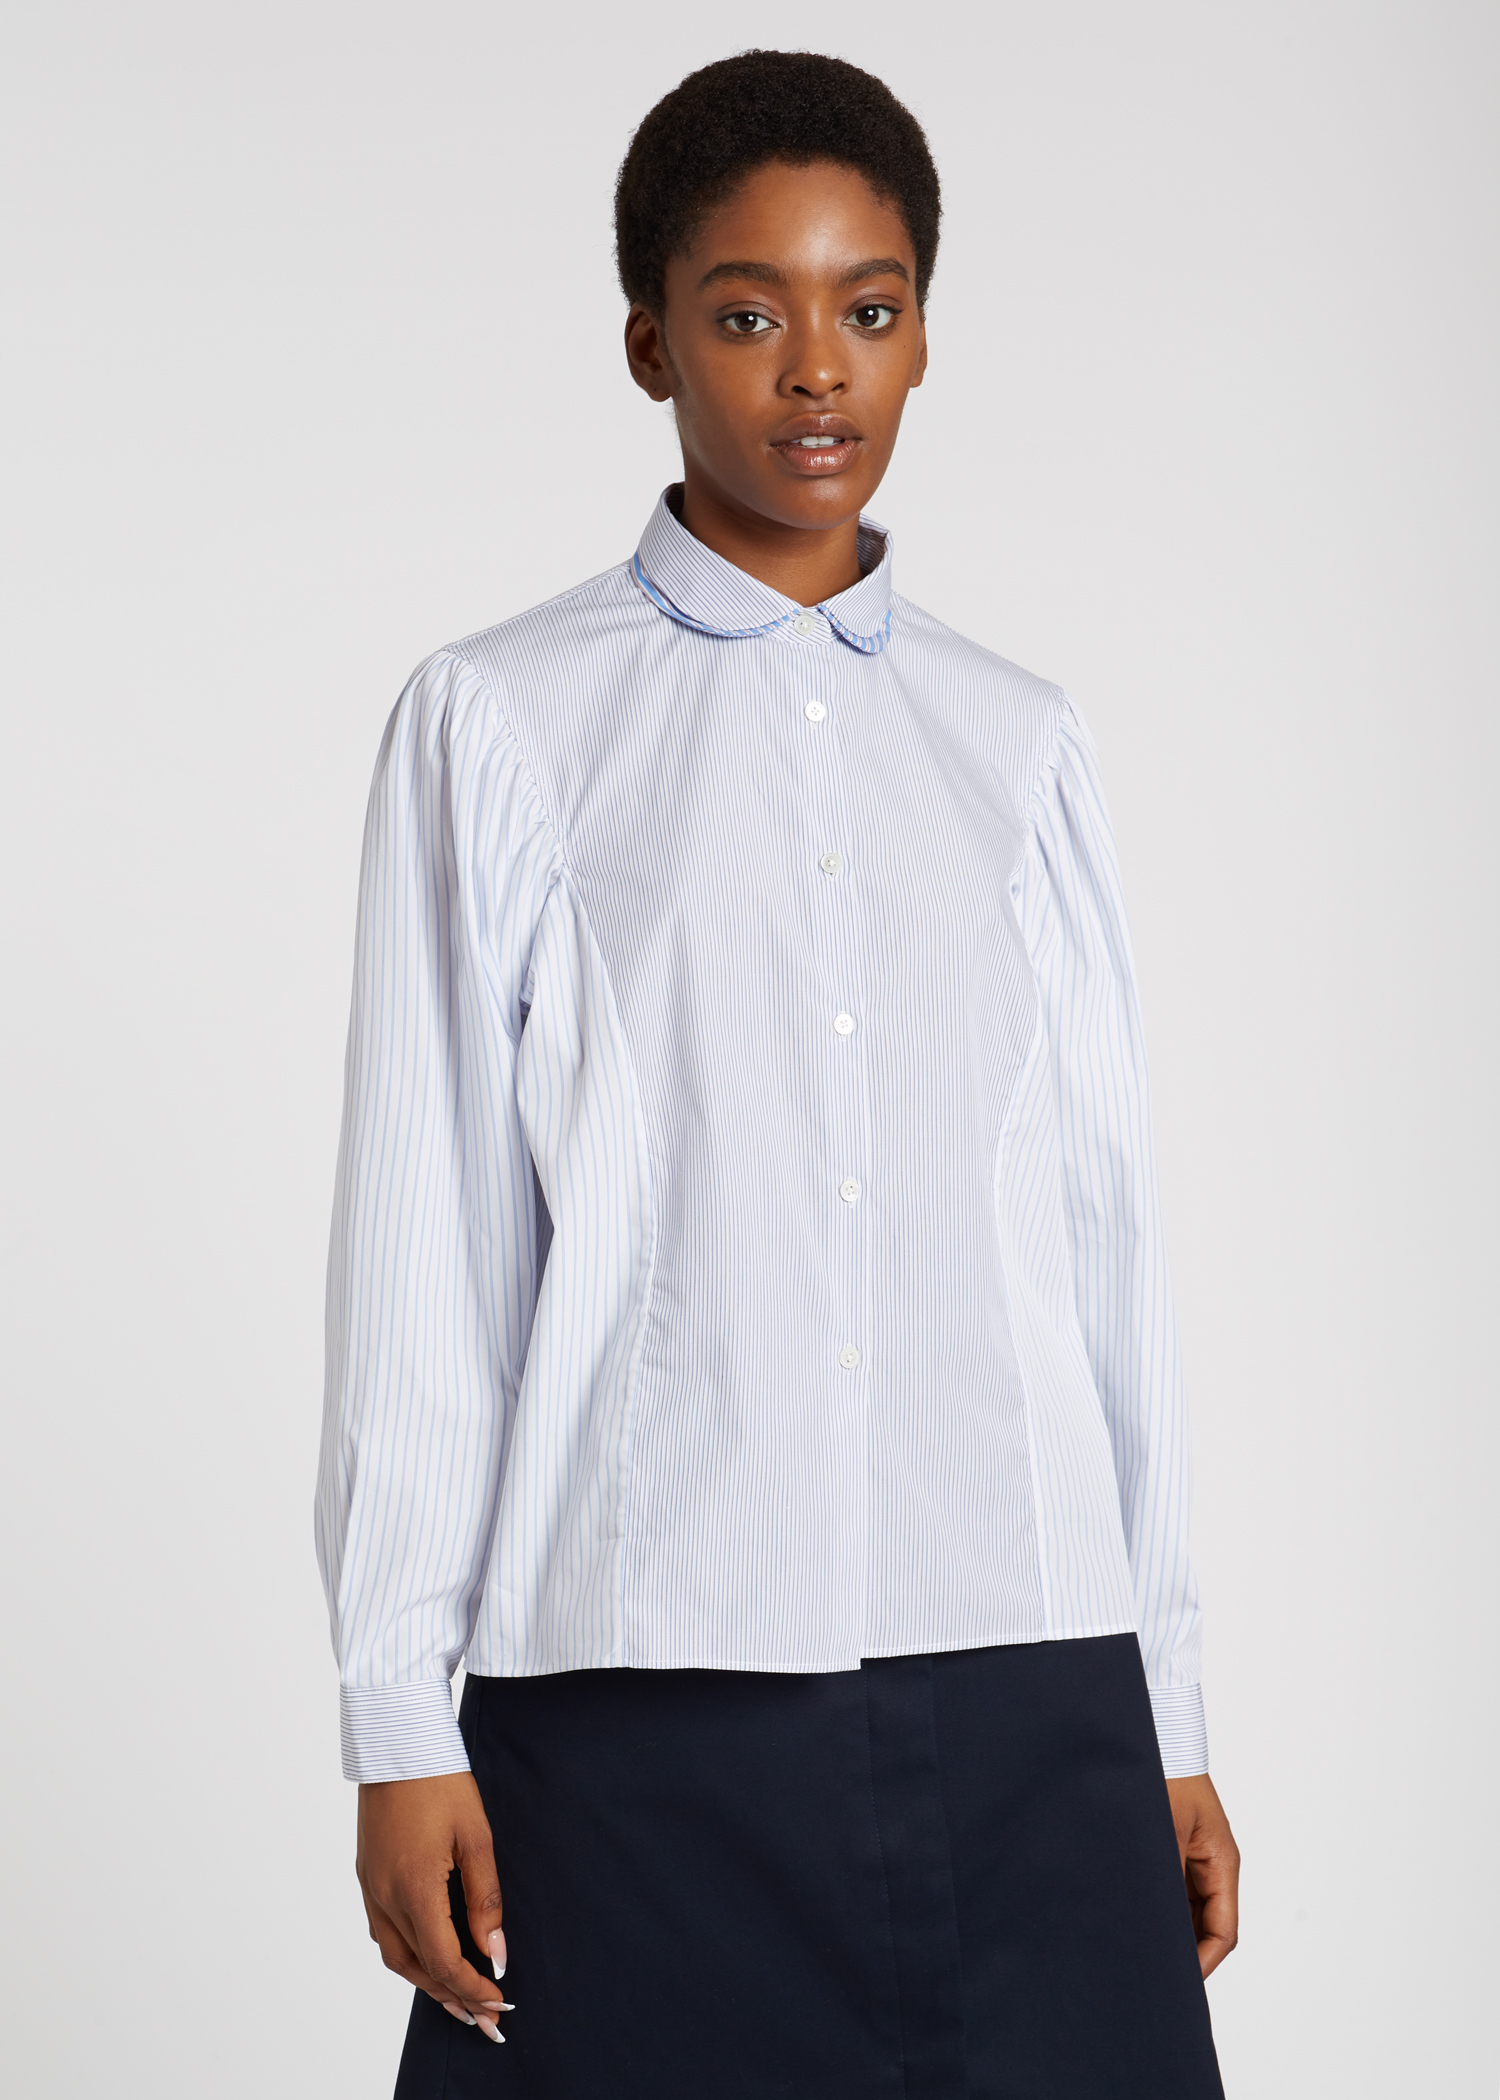 Women's White And Blue Stripe Cotton Shirt With Frill Collar